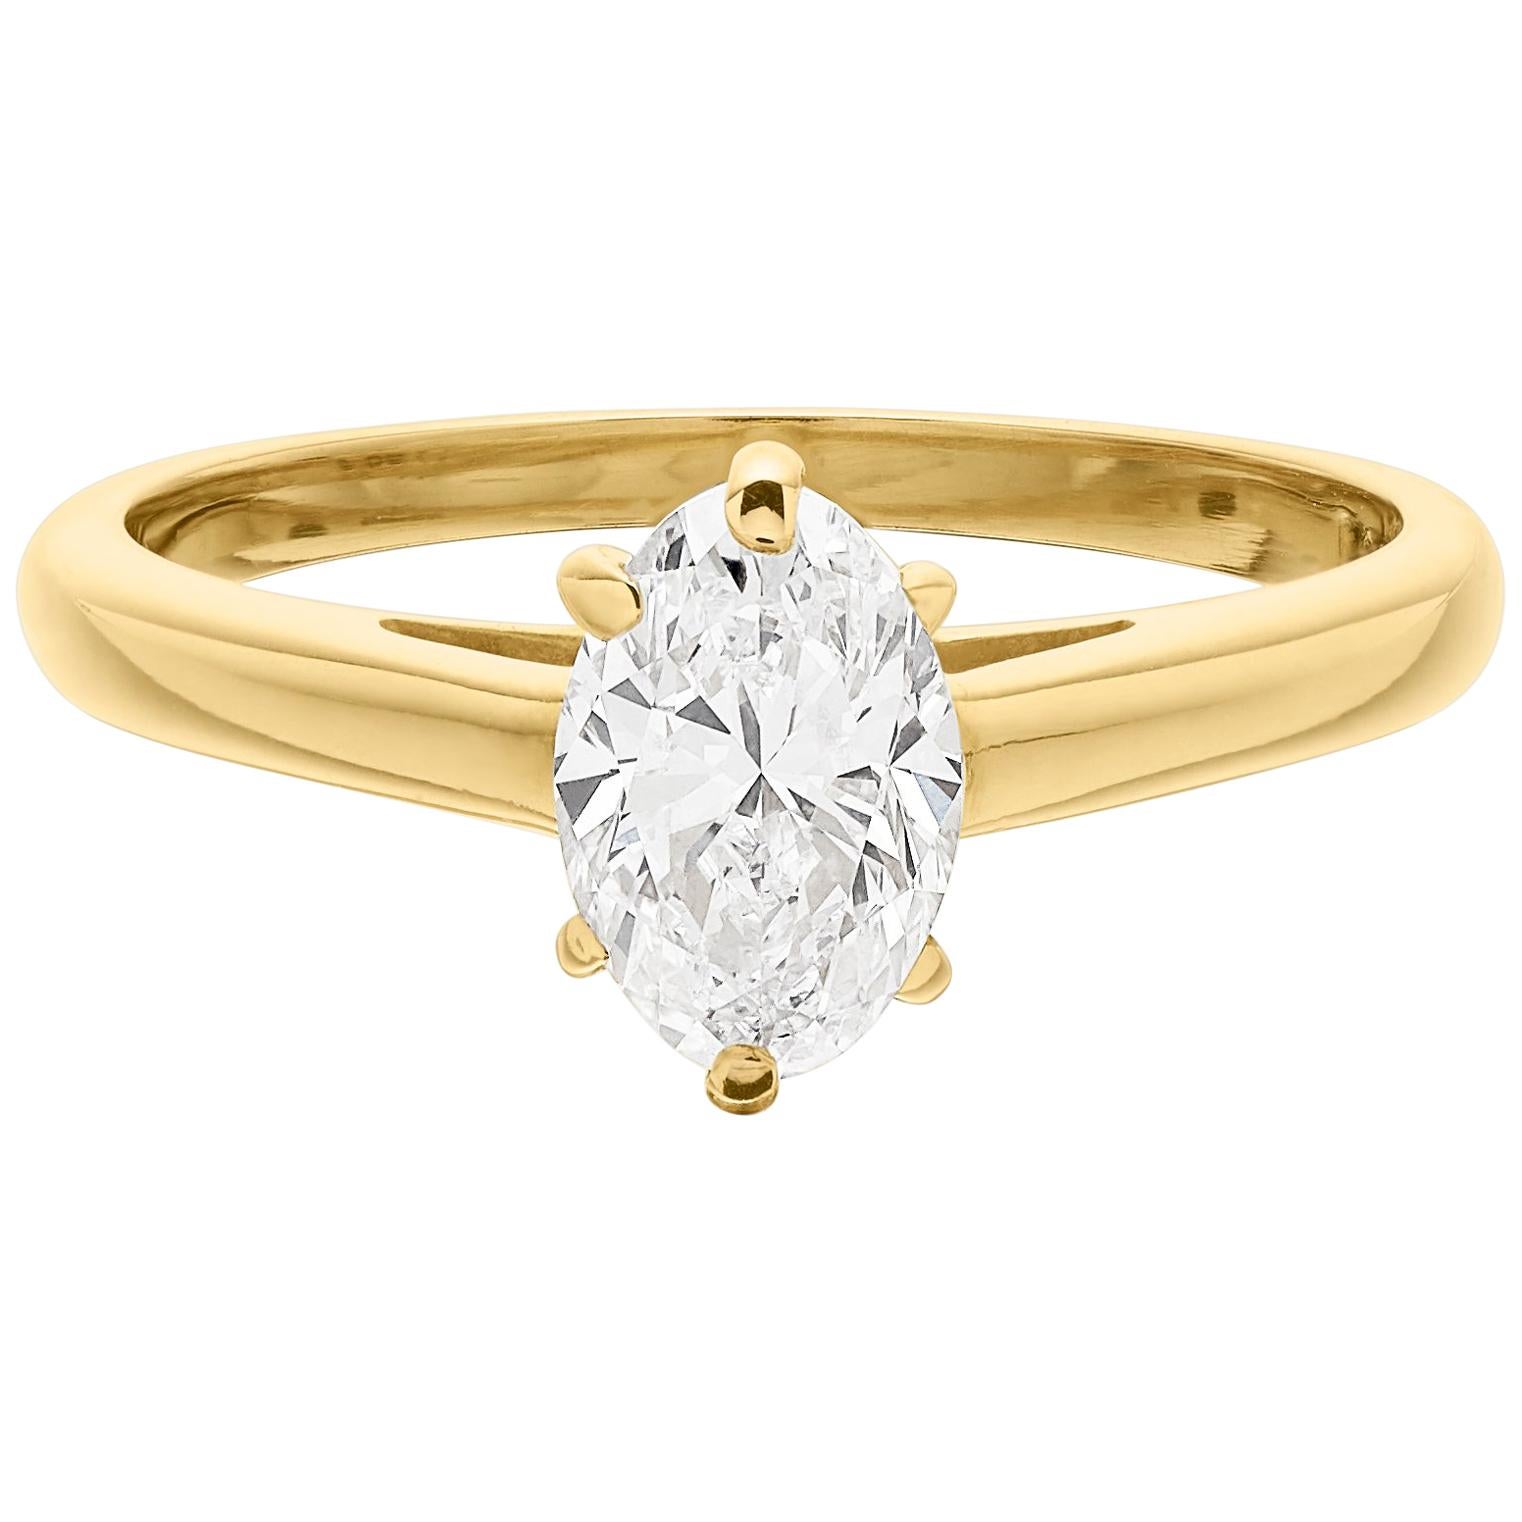 cartier engagement ring oval